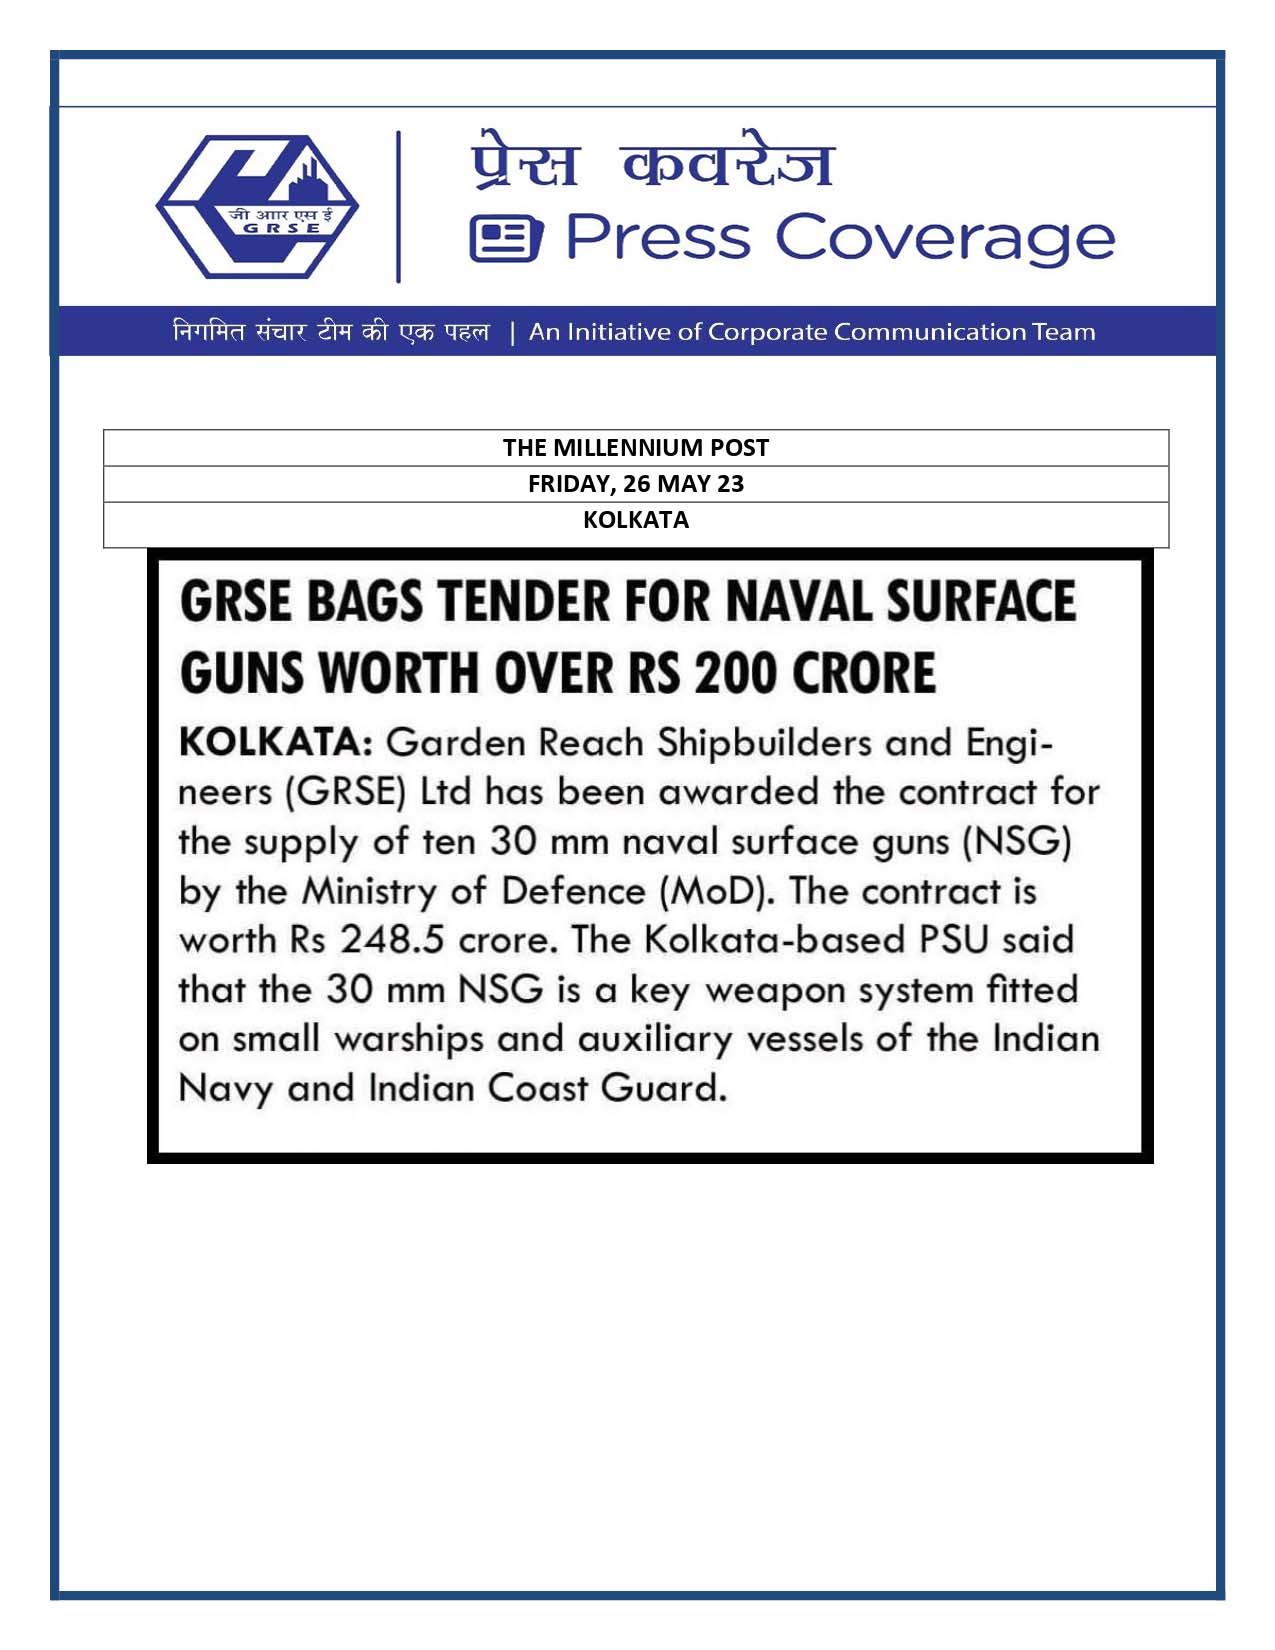 GRSE Bags Tender for Naval Surface Guns worth over Rs 200 Crore